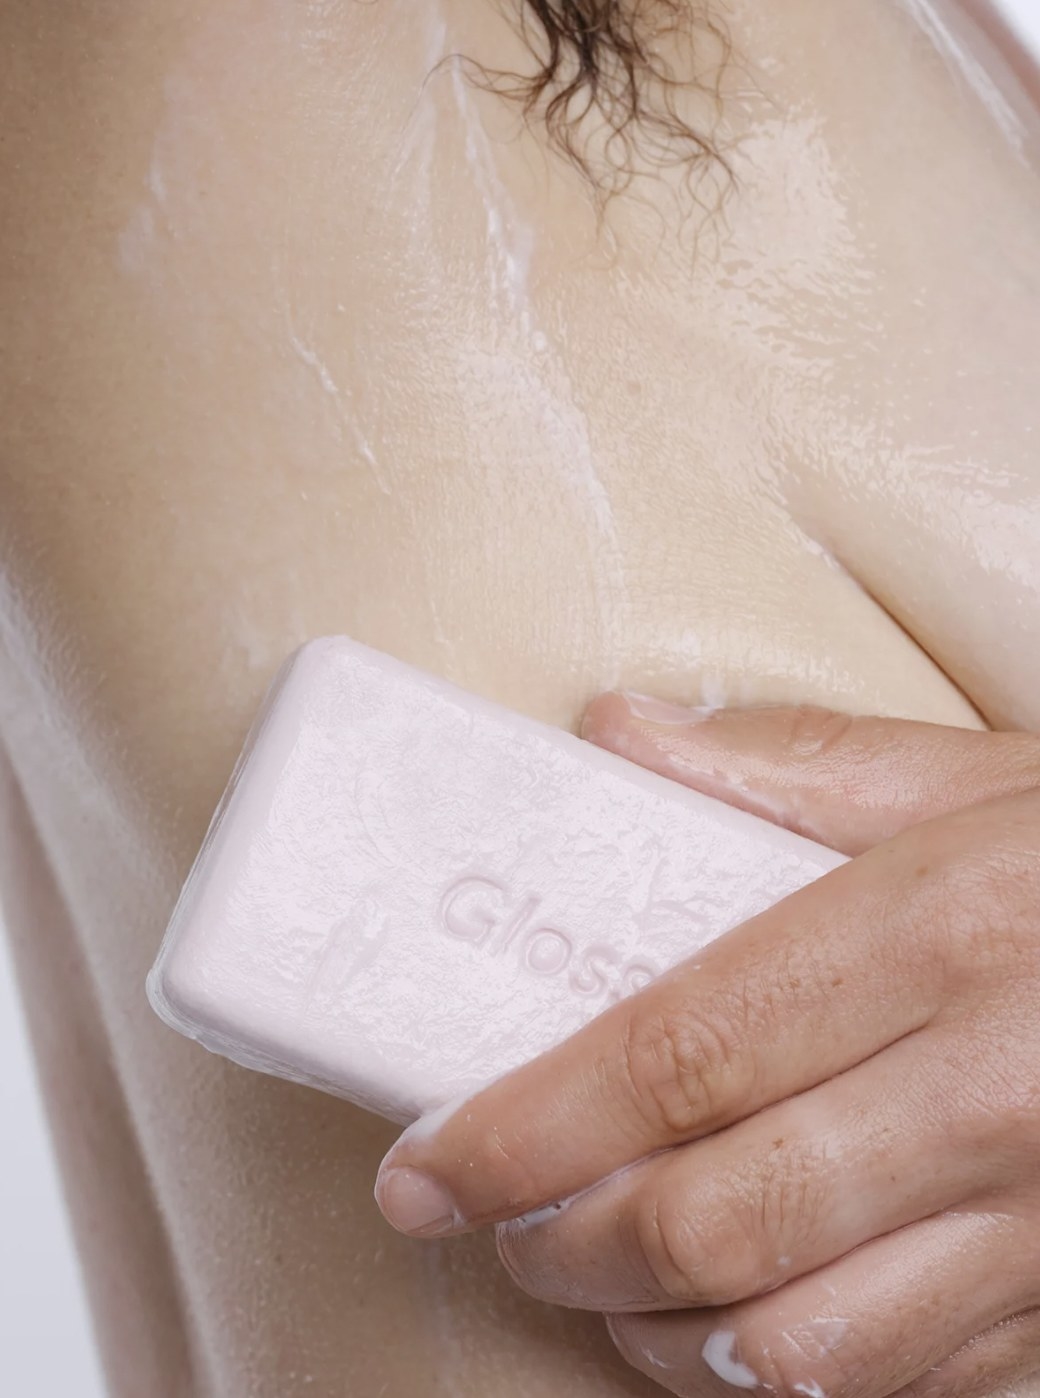 Model scrubbing the exfoliating bar into a lather on their skin